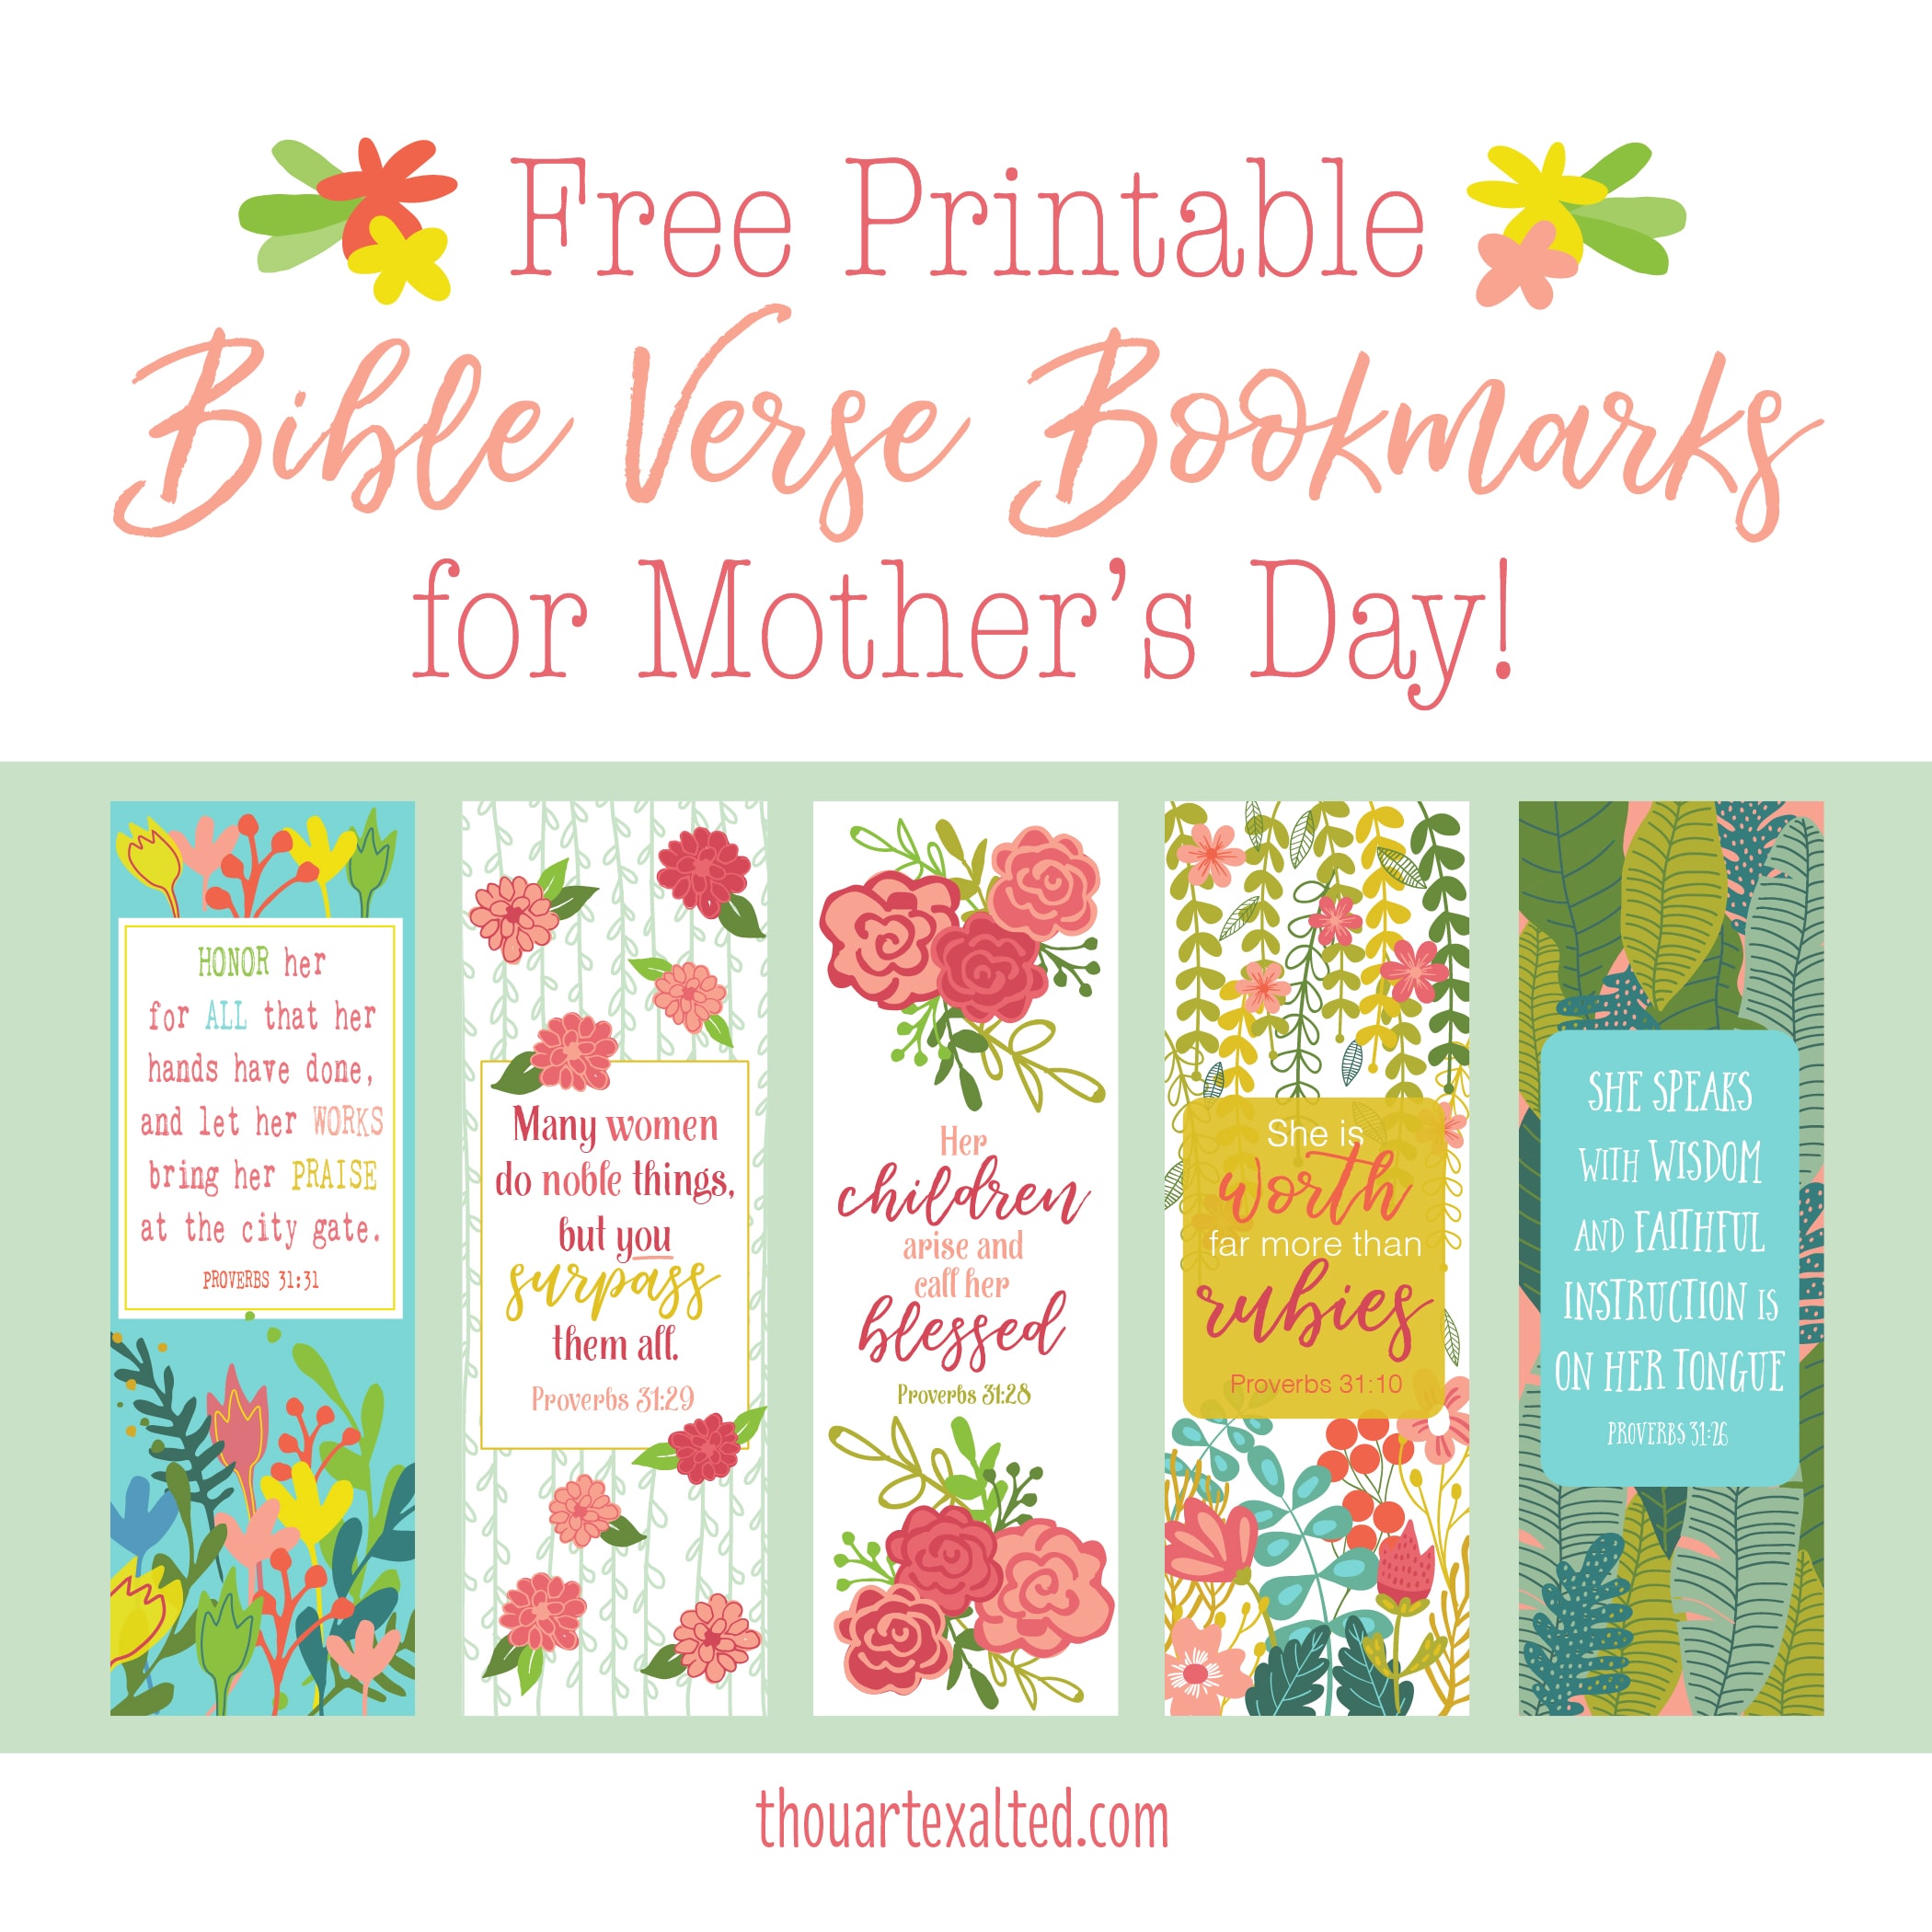 FREE Mother’s Day Bookmarks ThouArtExalted